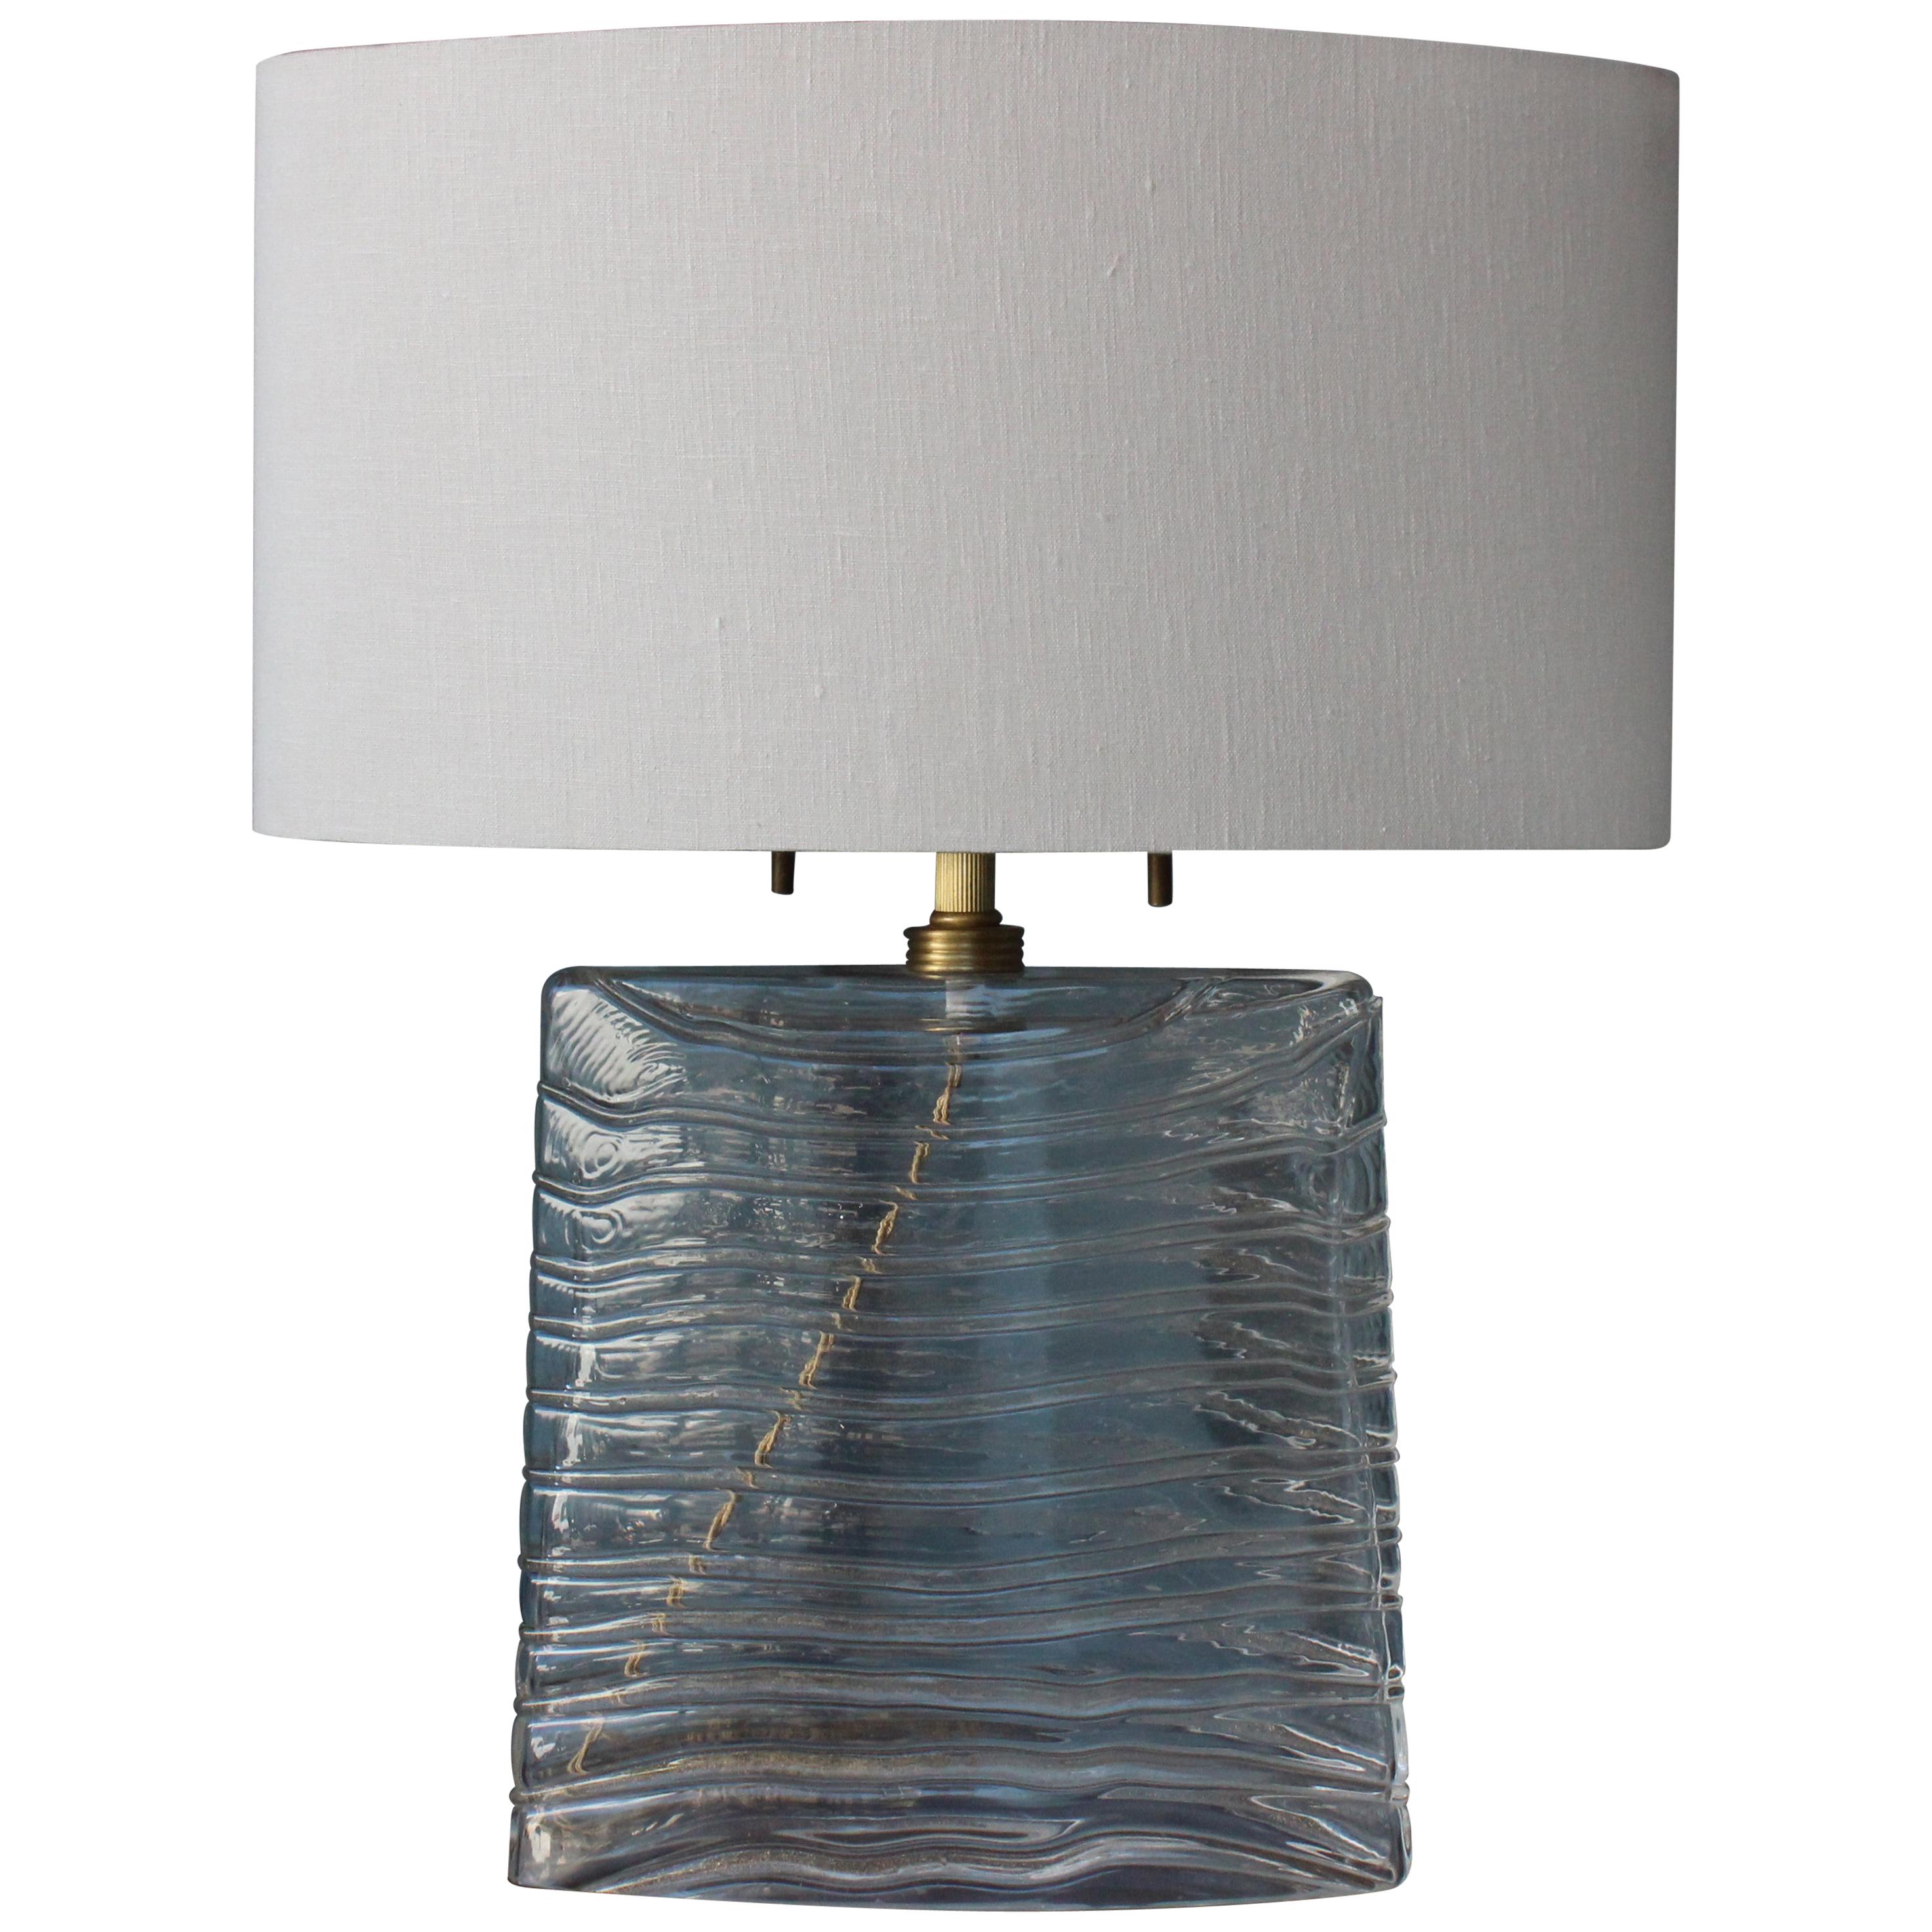 Pair of Vela Venetian Glass Lamps by Donghia, Sold as a Pair